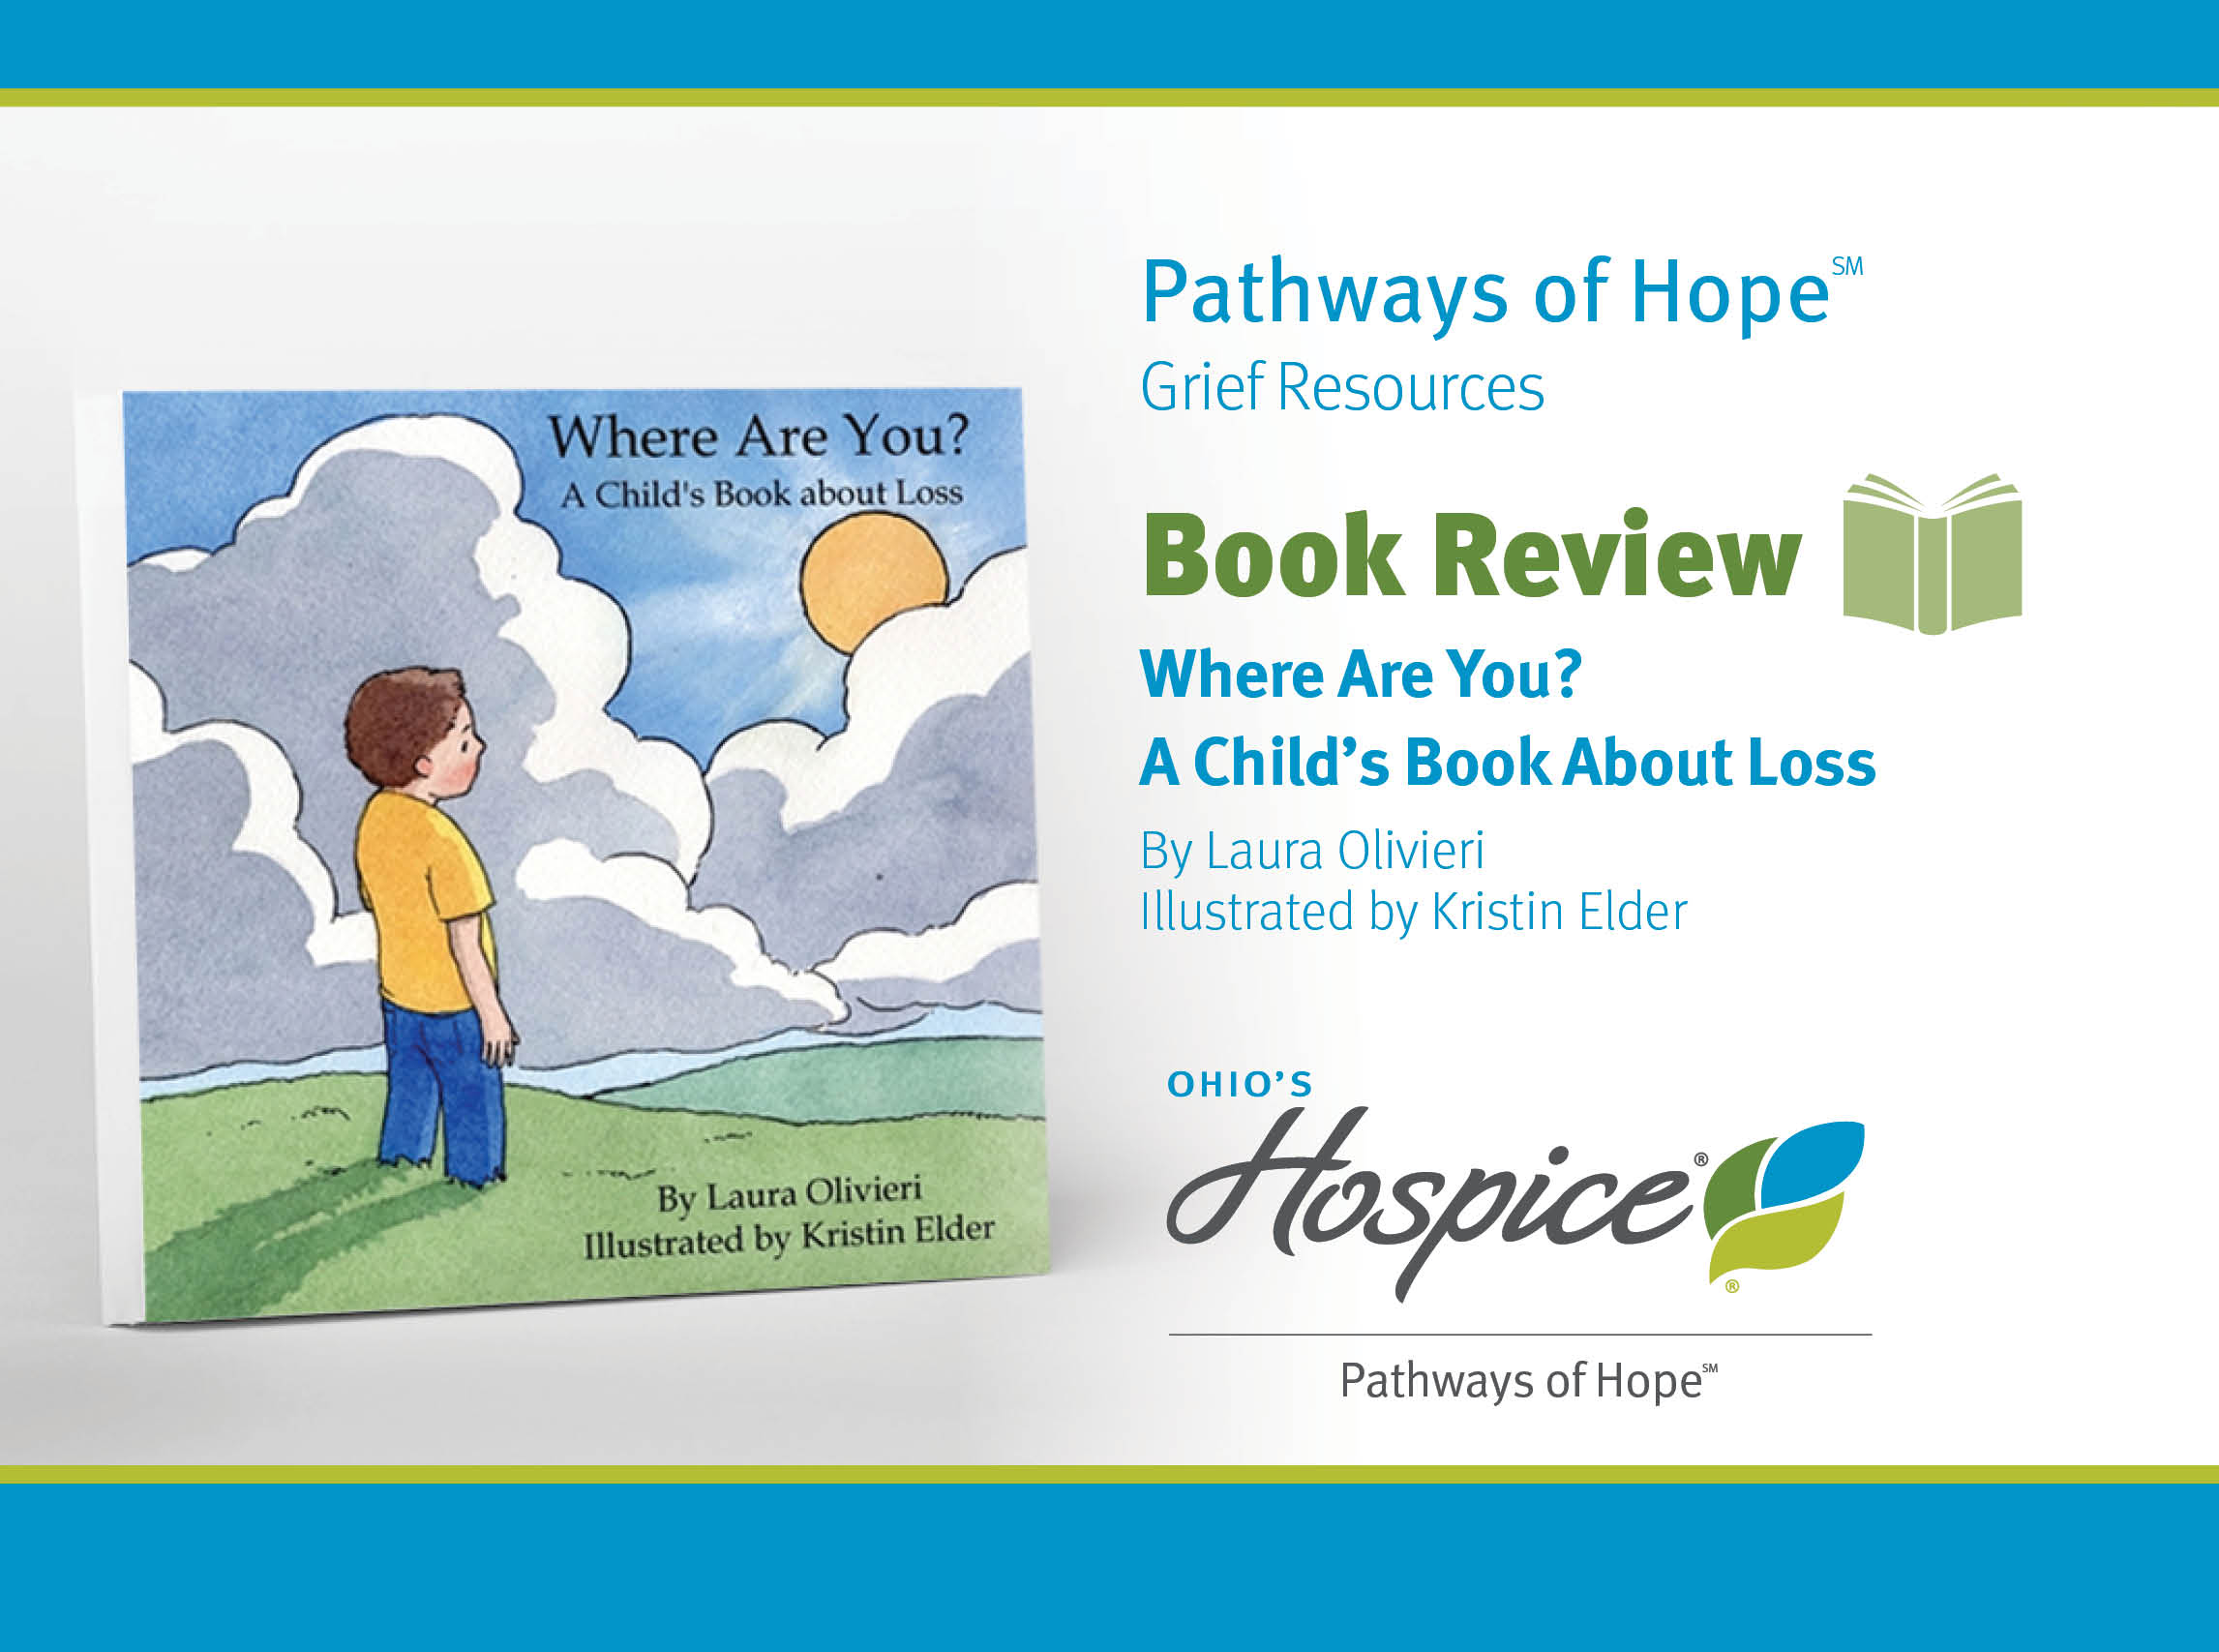 Pathways of Hope Grief Resources. Book review: Where Are You? A Child's Book About Loss